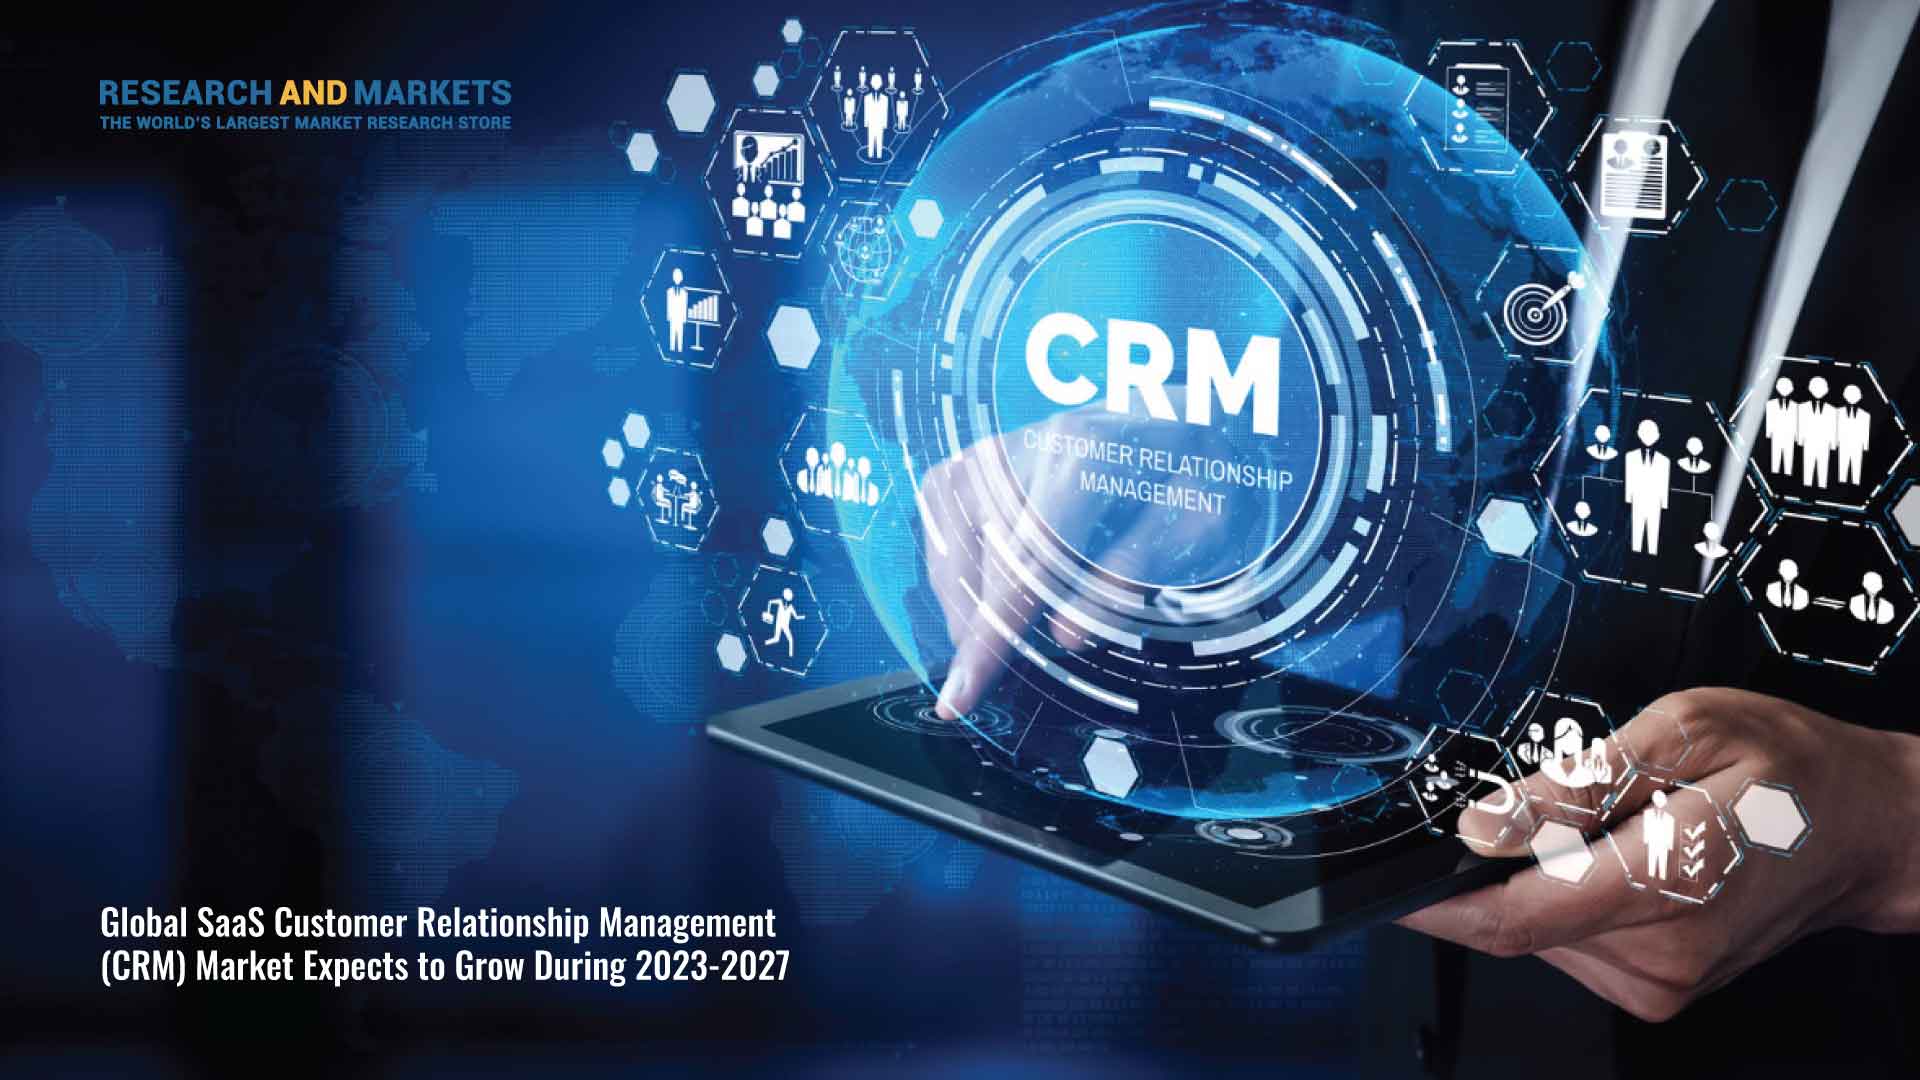 Global SaaS Customer Relationship Management (CRM) Market to Grow by $59.42 Billion During 2023-2027